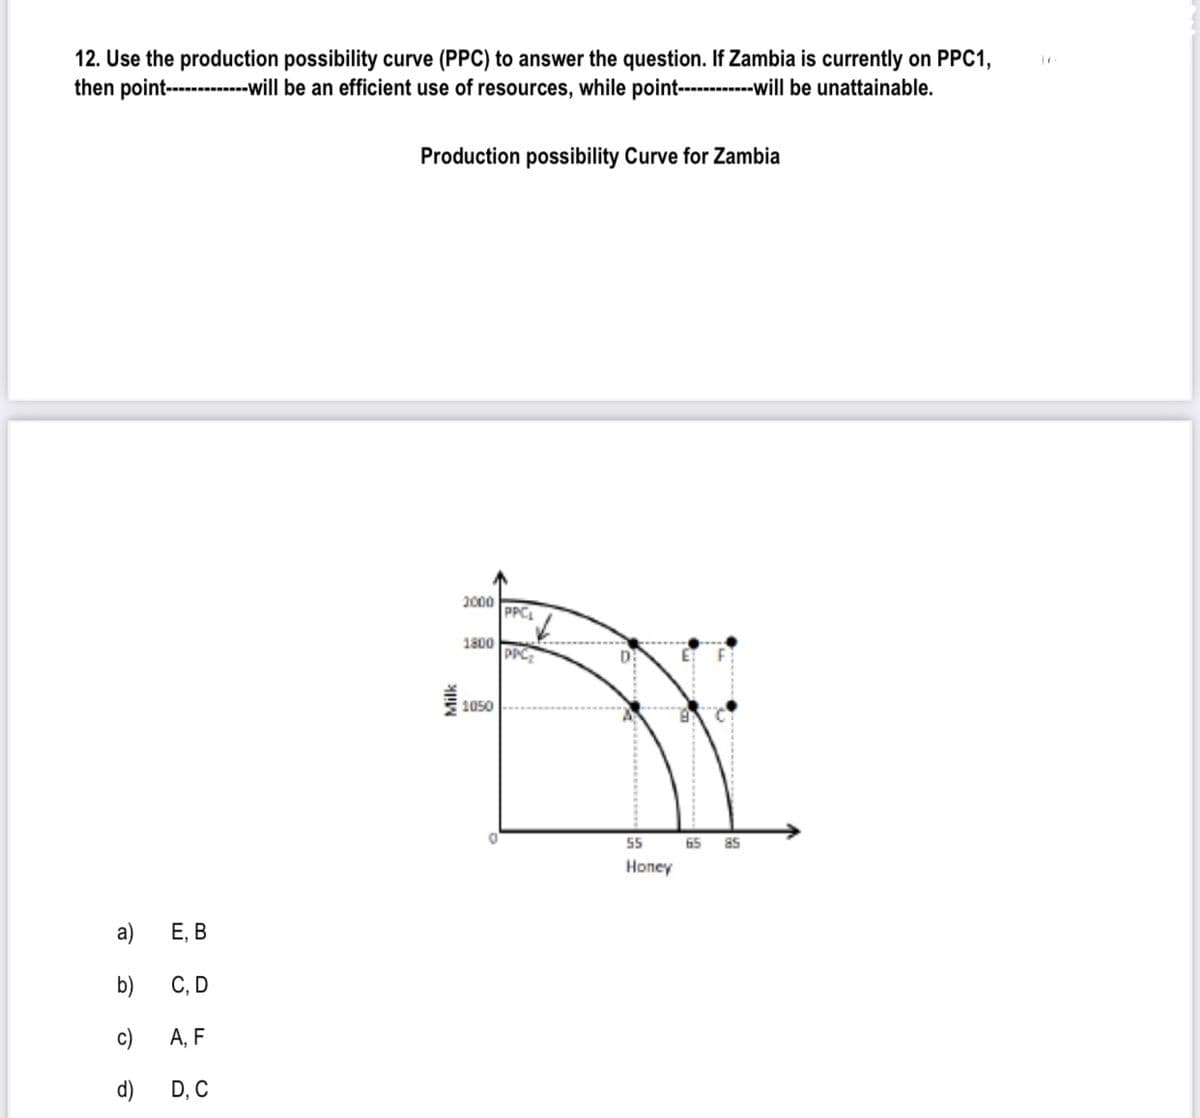 12. Use the production possibility curve (PPC) to answer the question. If Zambia is currently on PPC1,
then point-------will be an efficient use of resources, while point-----------will be unattainable.
Production possibility Curve for Zambia
2000
PPC
1800
PPC
1050
S5
65
85
Honey
a)
Е, В
b)
С, D
c)
А, F
d)
D, C
Milk
